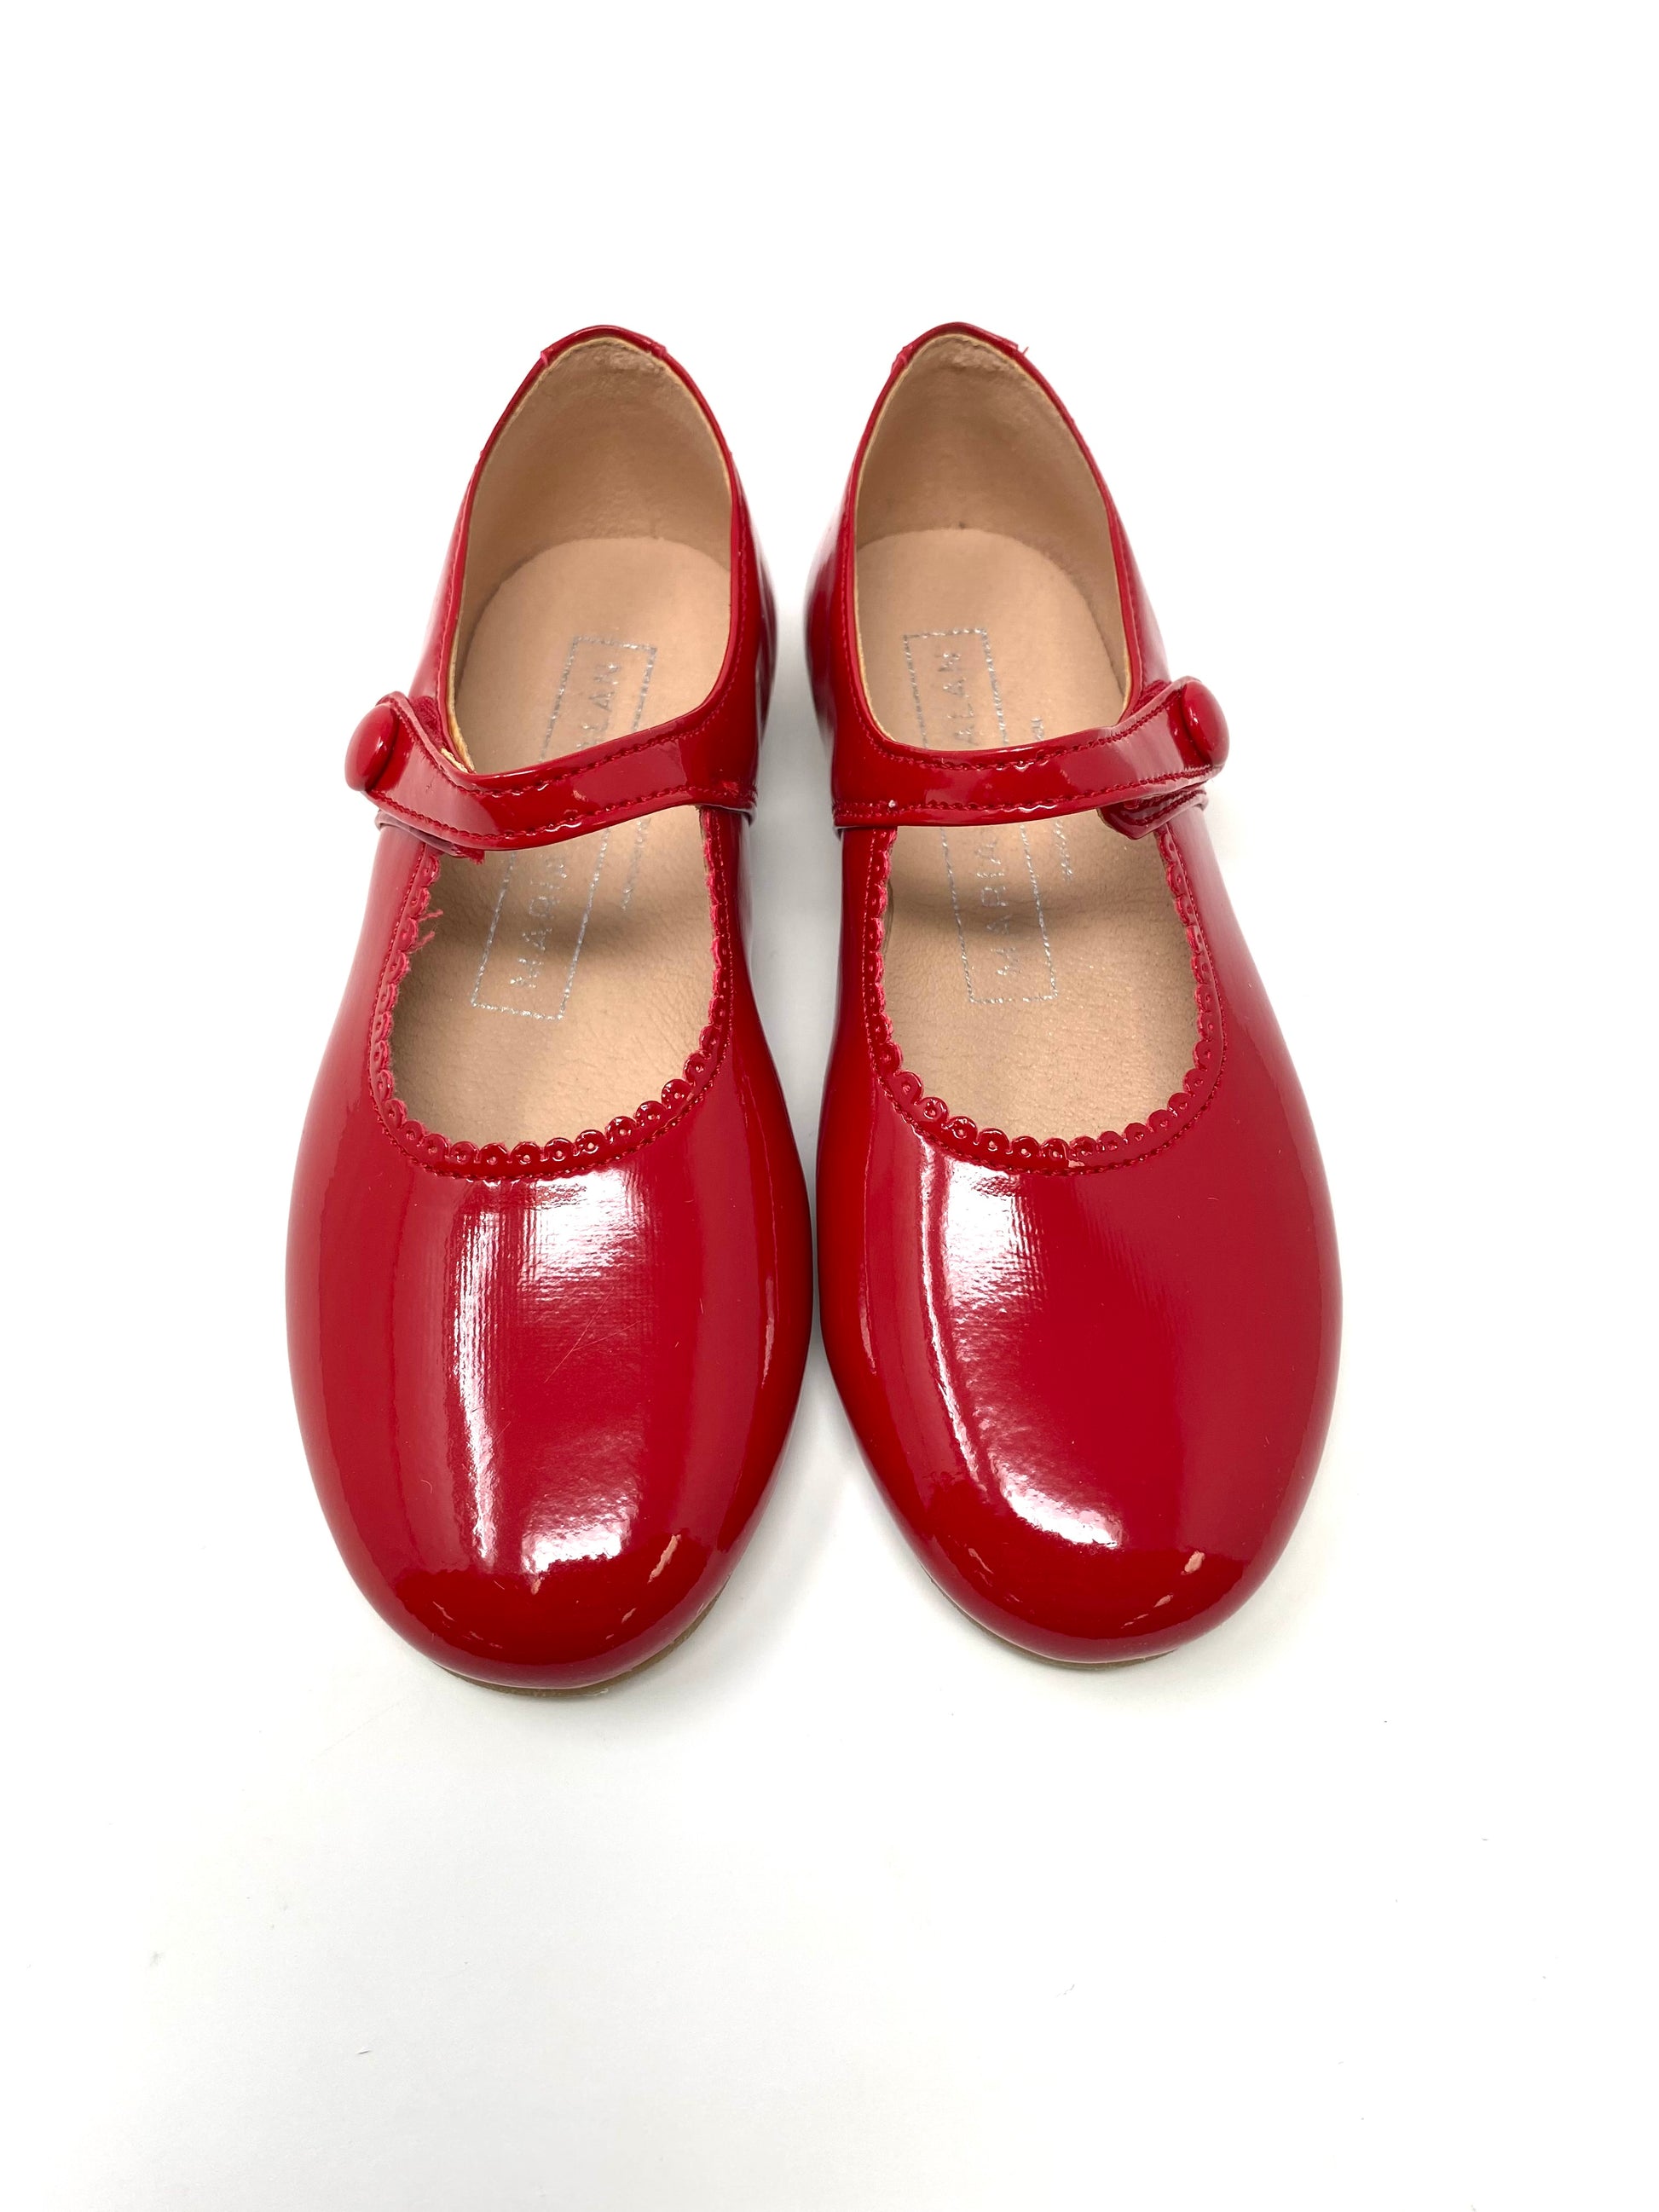 Elegant Button Mary Jane - Patent Red Girls Shoes Maria Catalan   